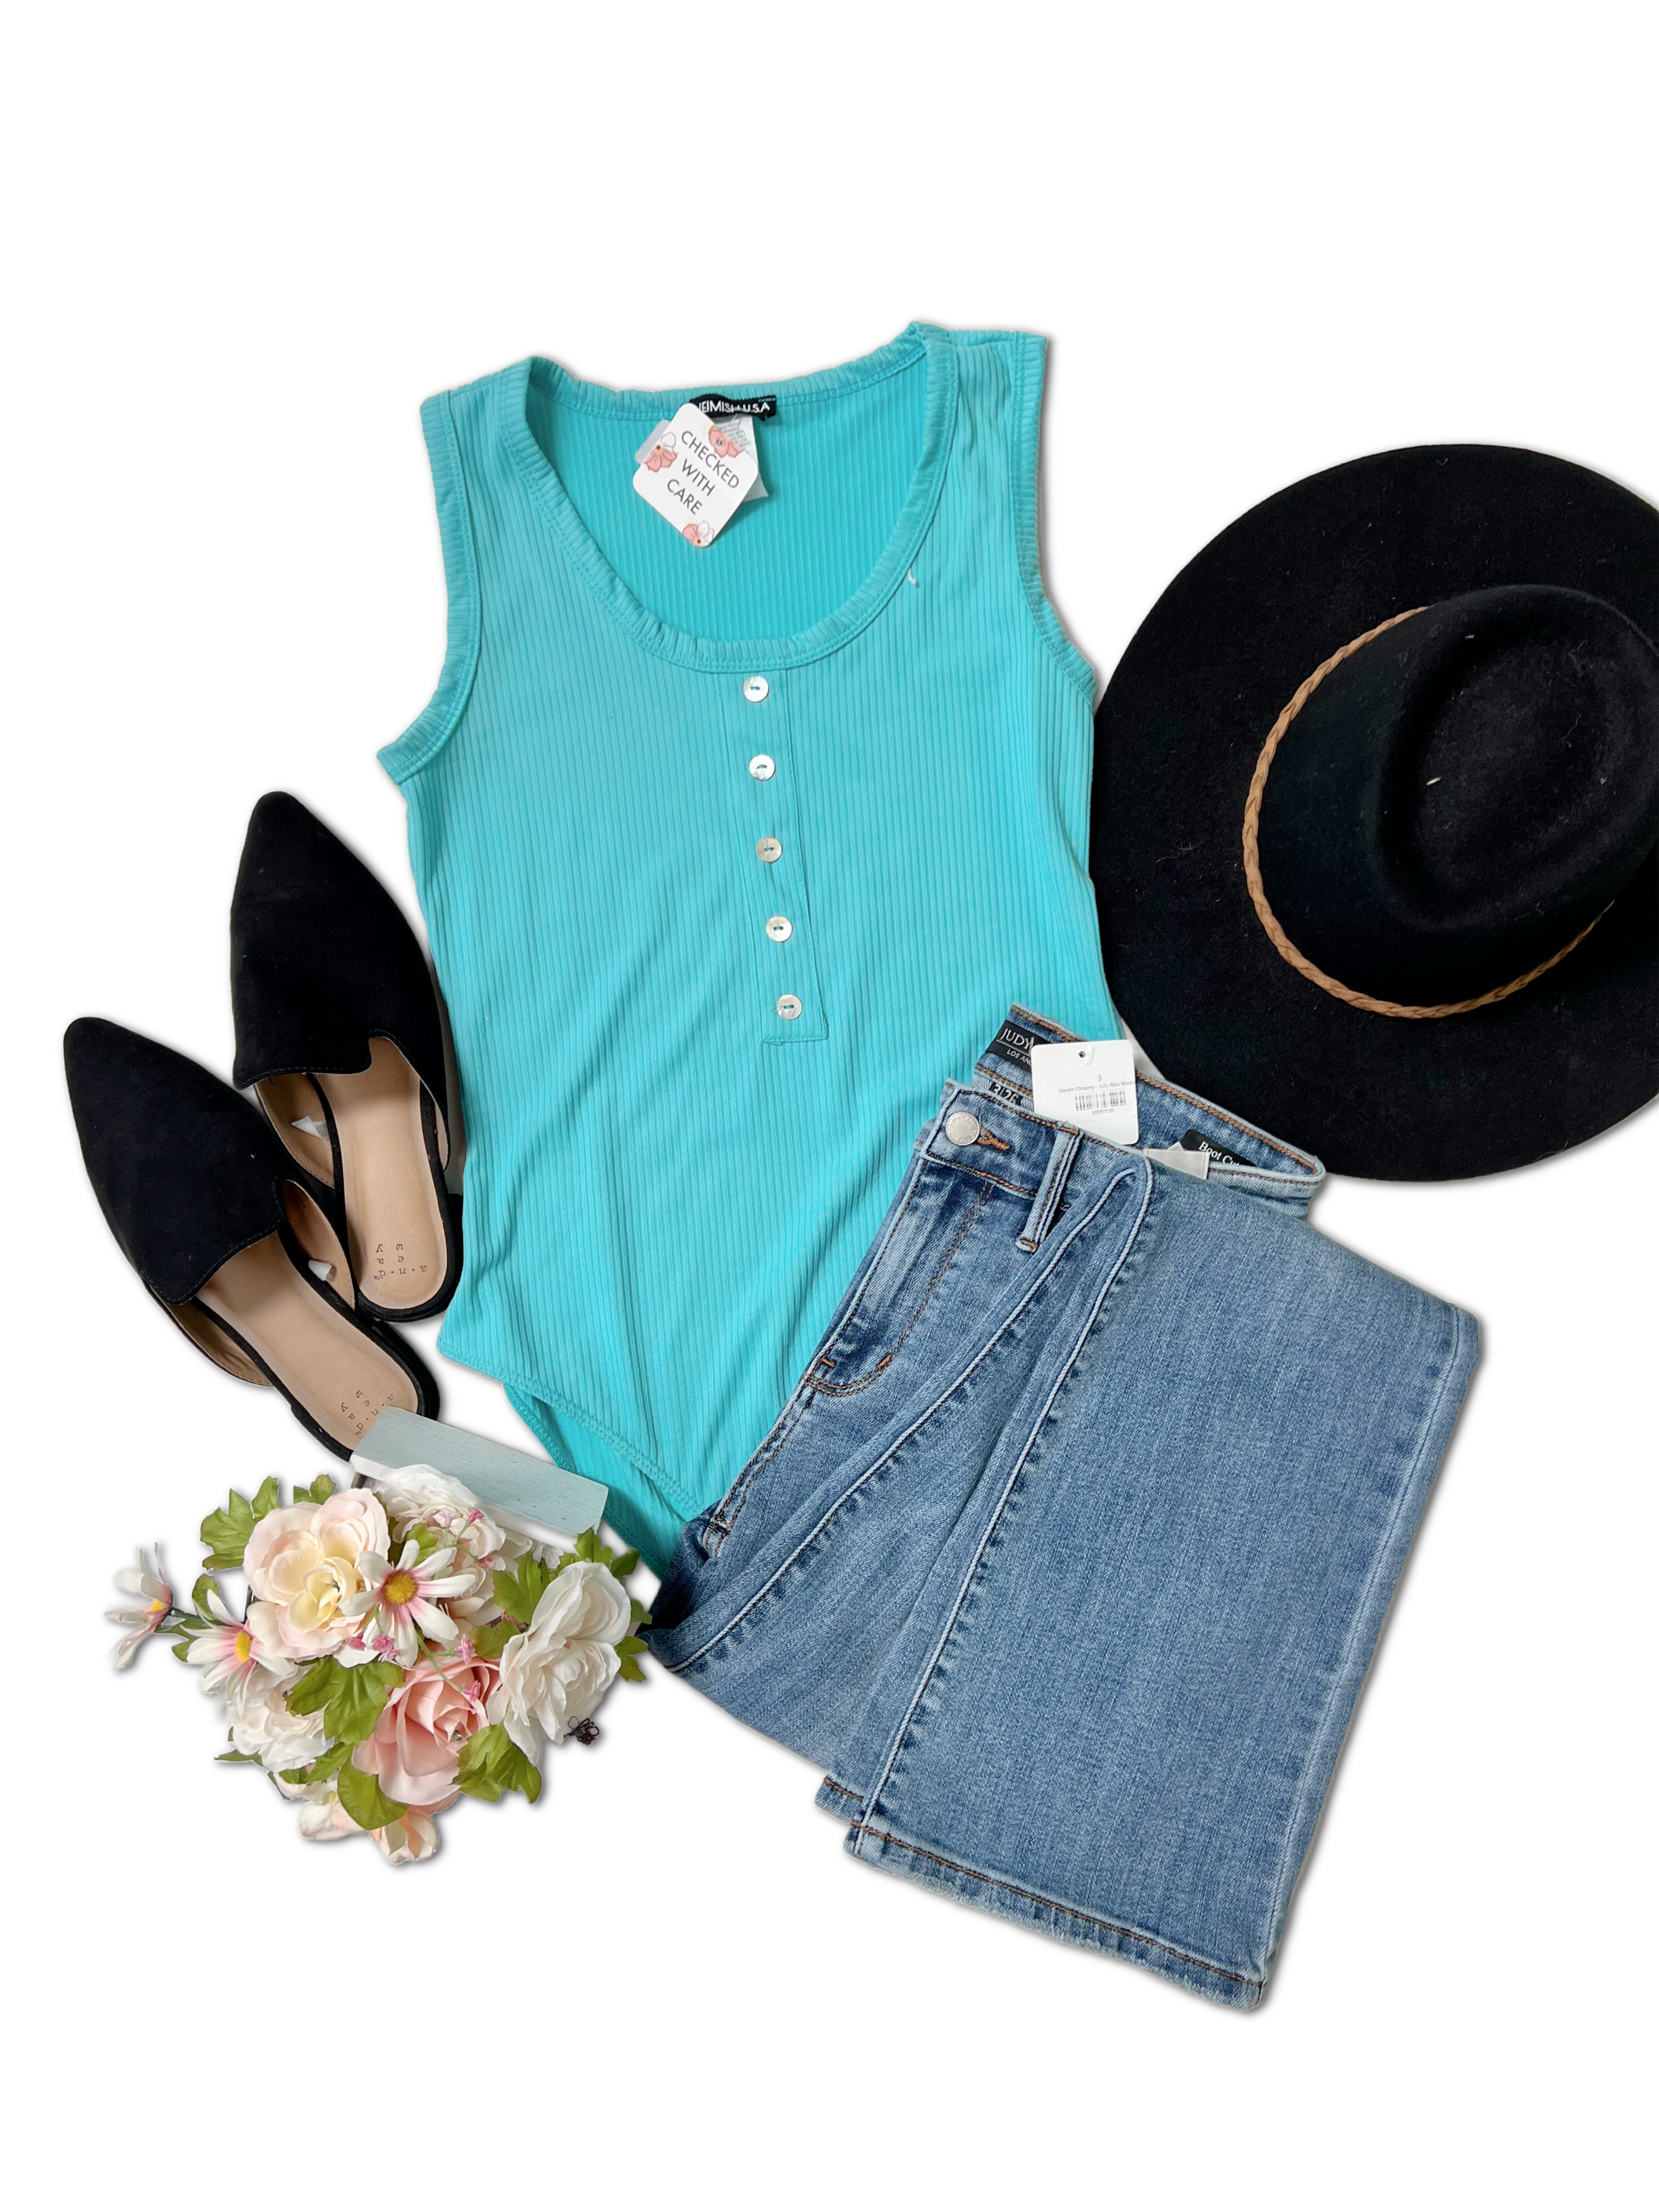 Teal Me Everything - Bodysuit  Boutique Simplified   